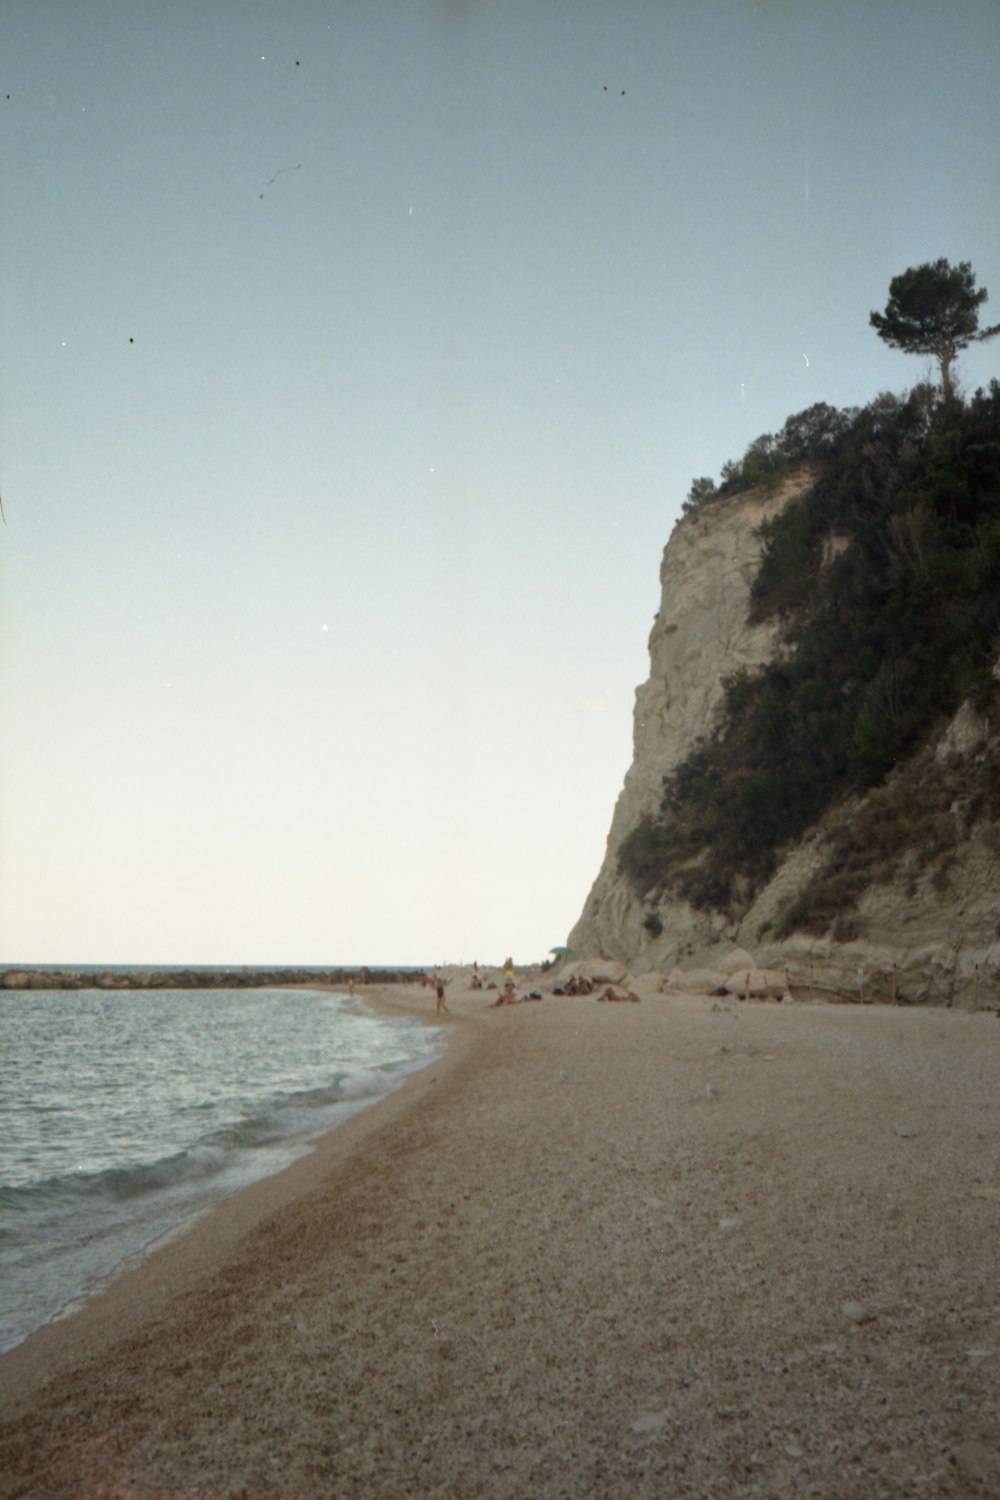 a sandy beach next to a cliff with a tree on top of it